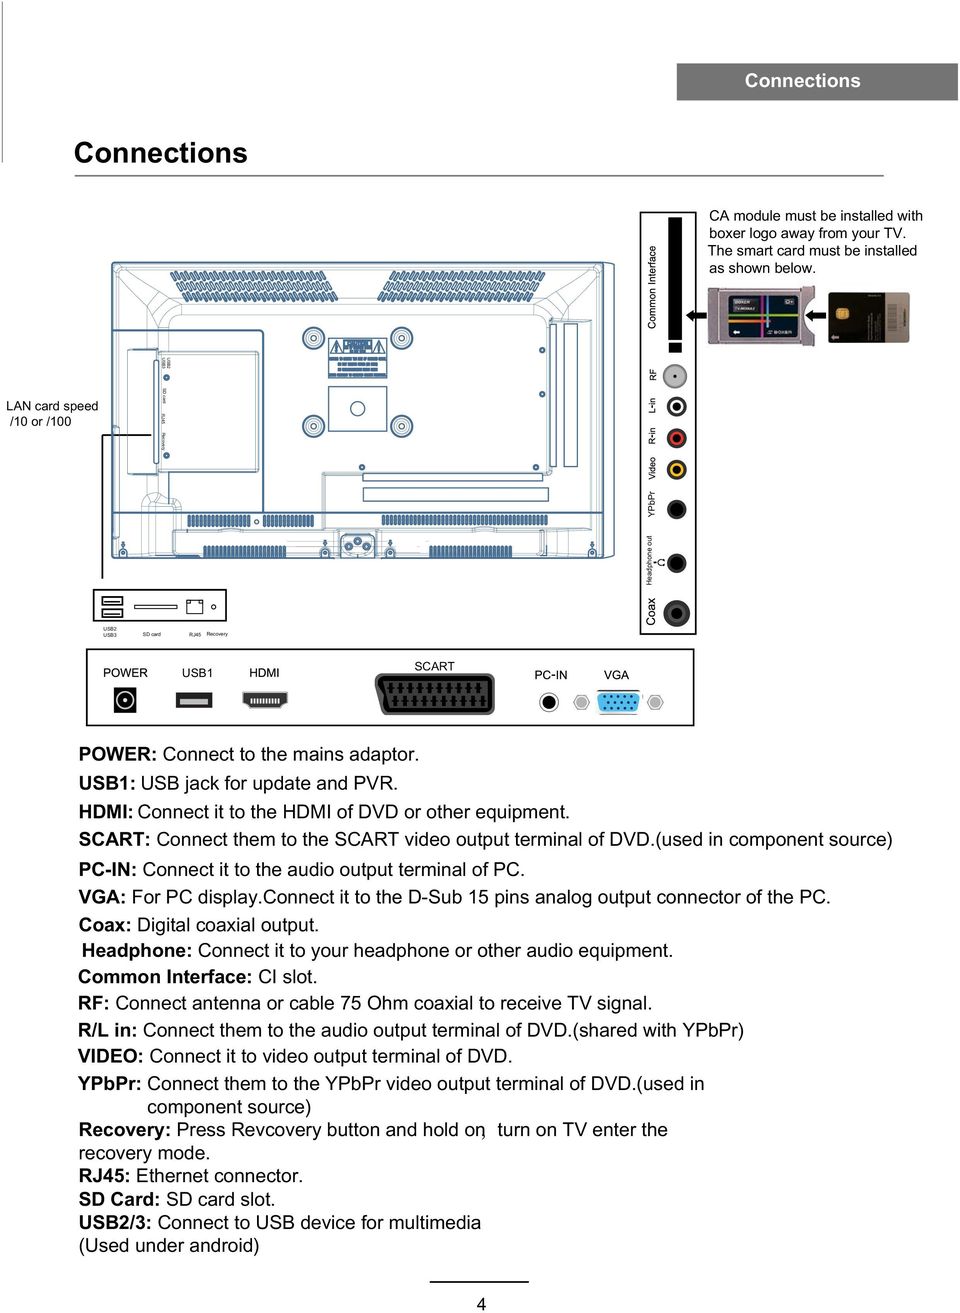 HDMI: Connect it to the HDMI of DVD or other equipment. SCART: Connect them to the SCART video output terminal of DVD.(used in component source) PC-IN: Connect it to the audio output terminal of PC.